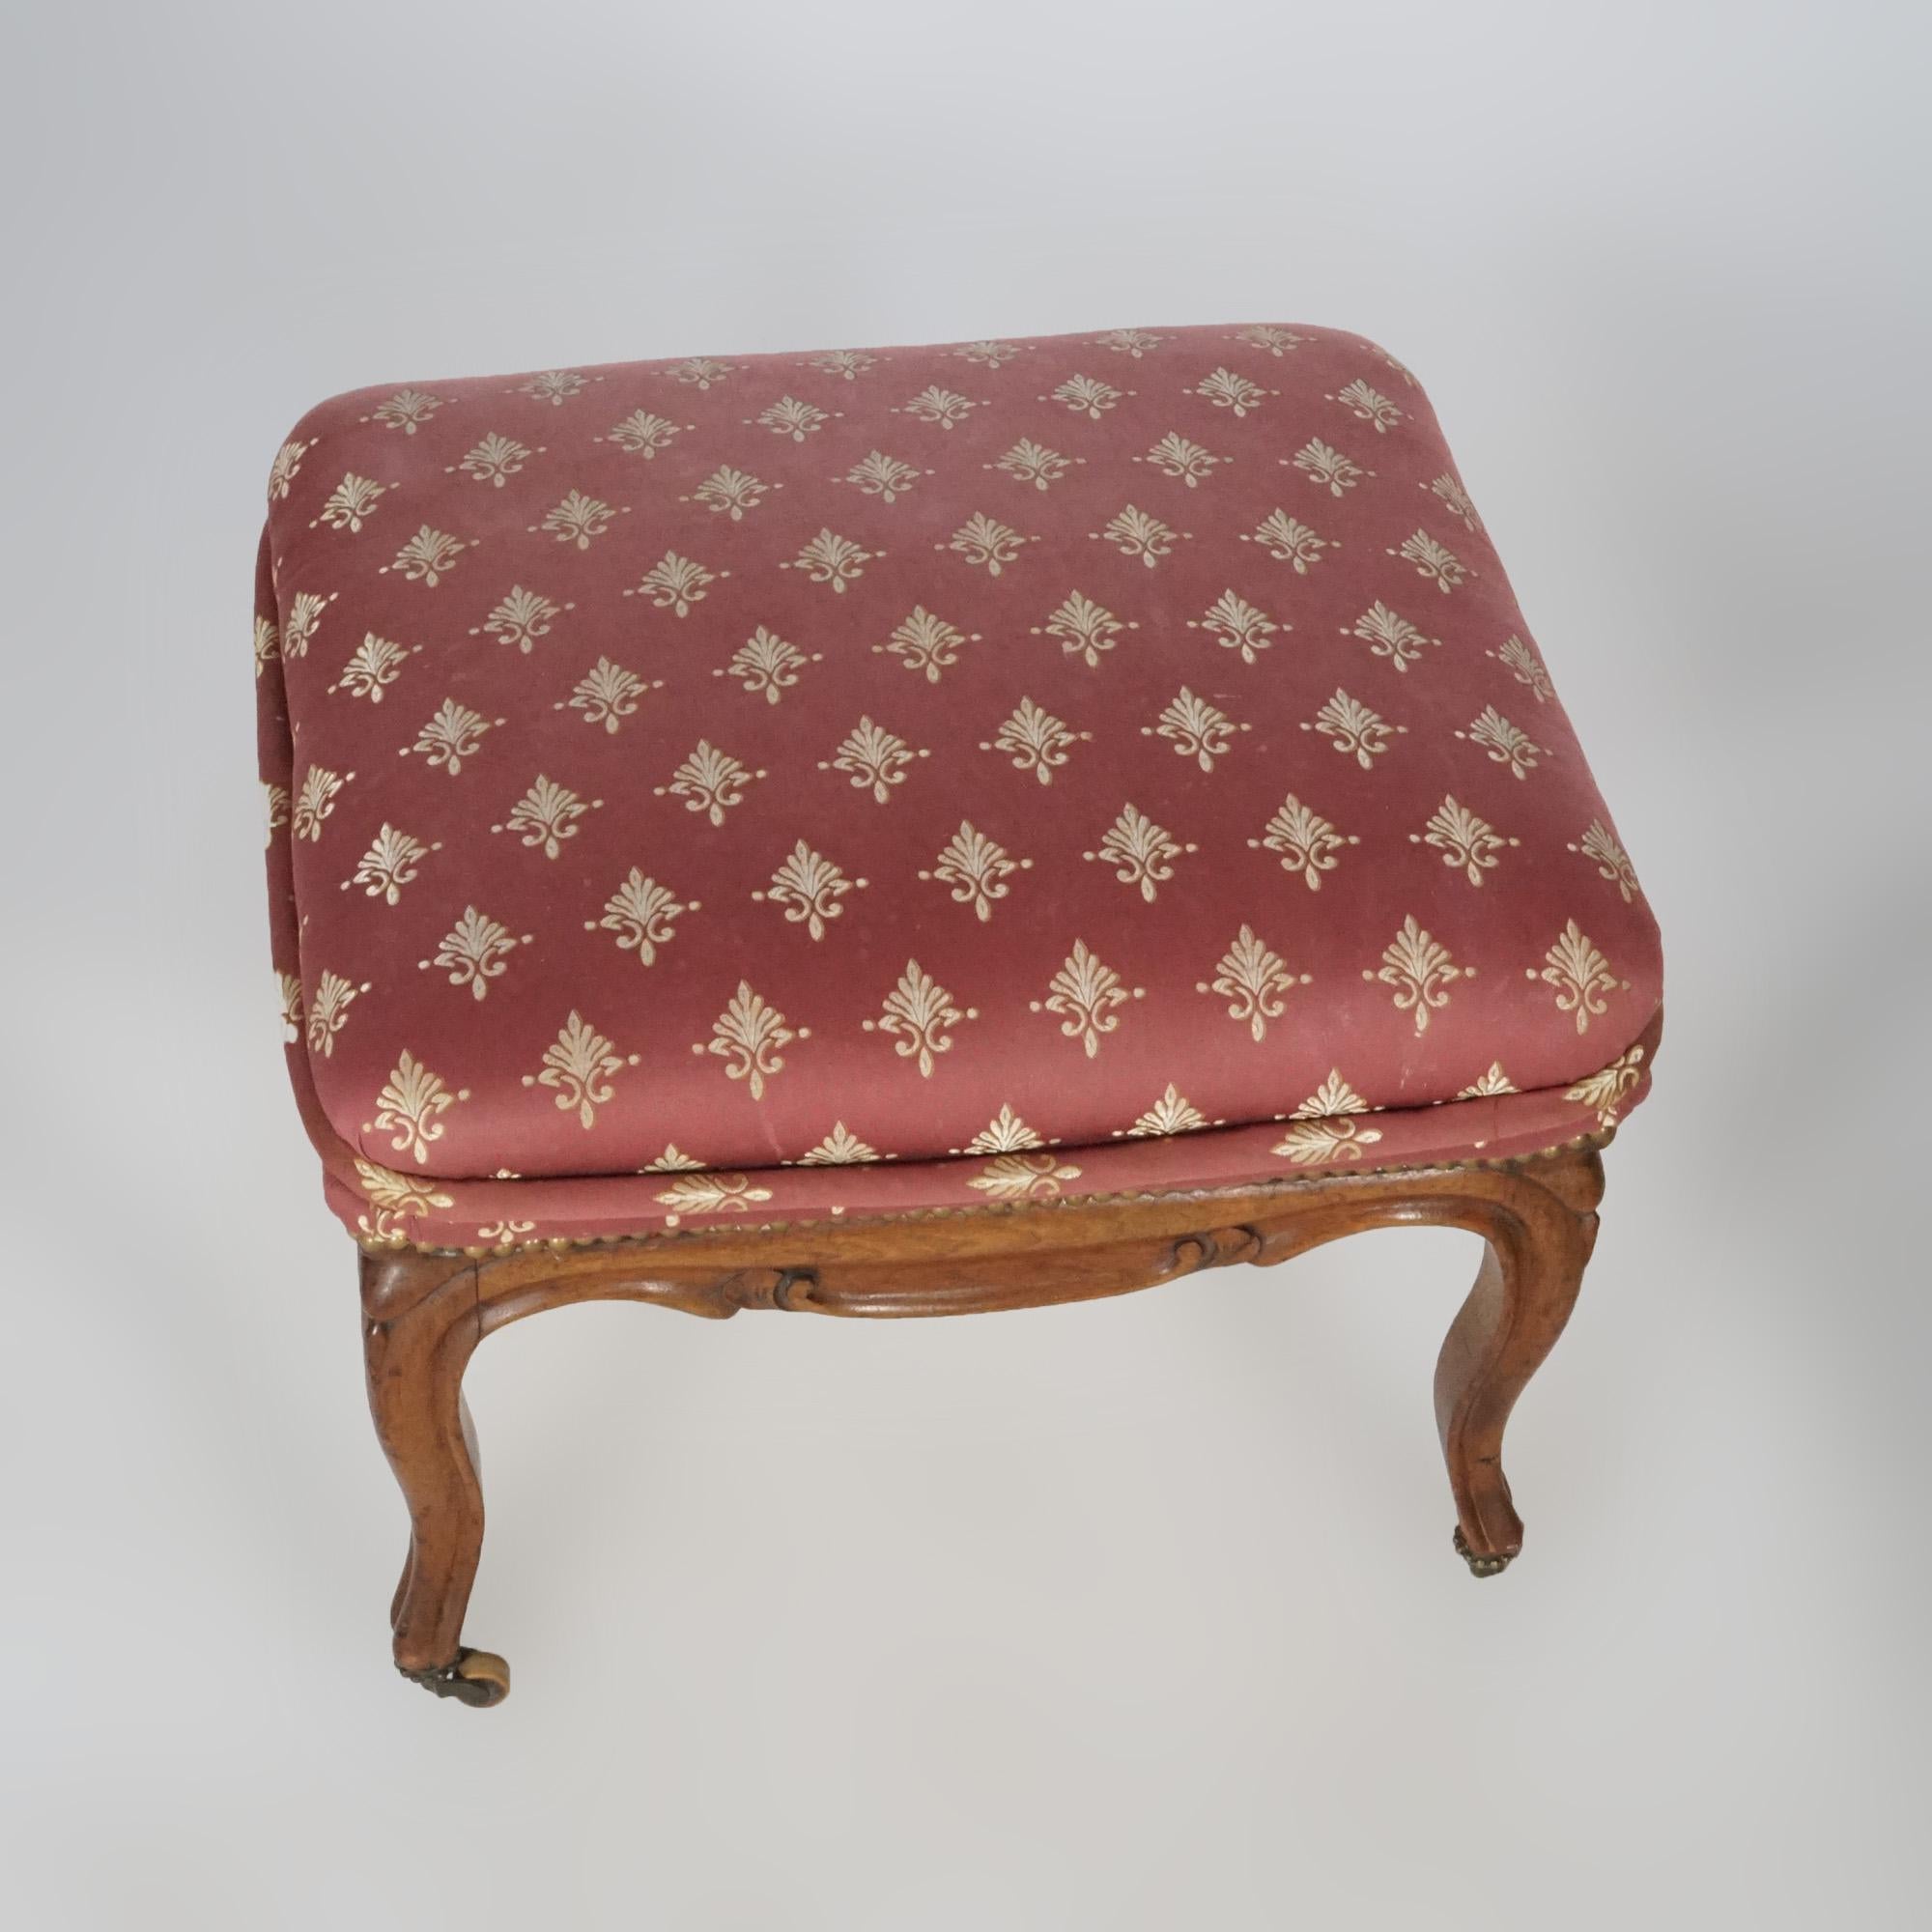 20th Century Antique French Style Carved Walnut & Upholstered Foot Stool, circa 1920 For Sale